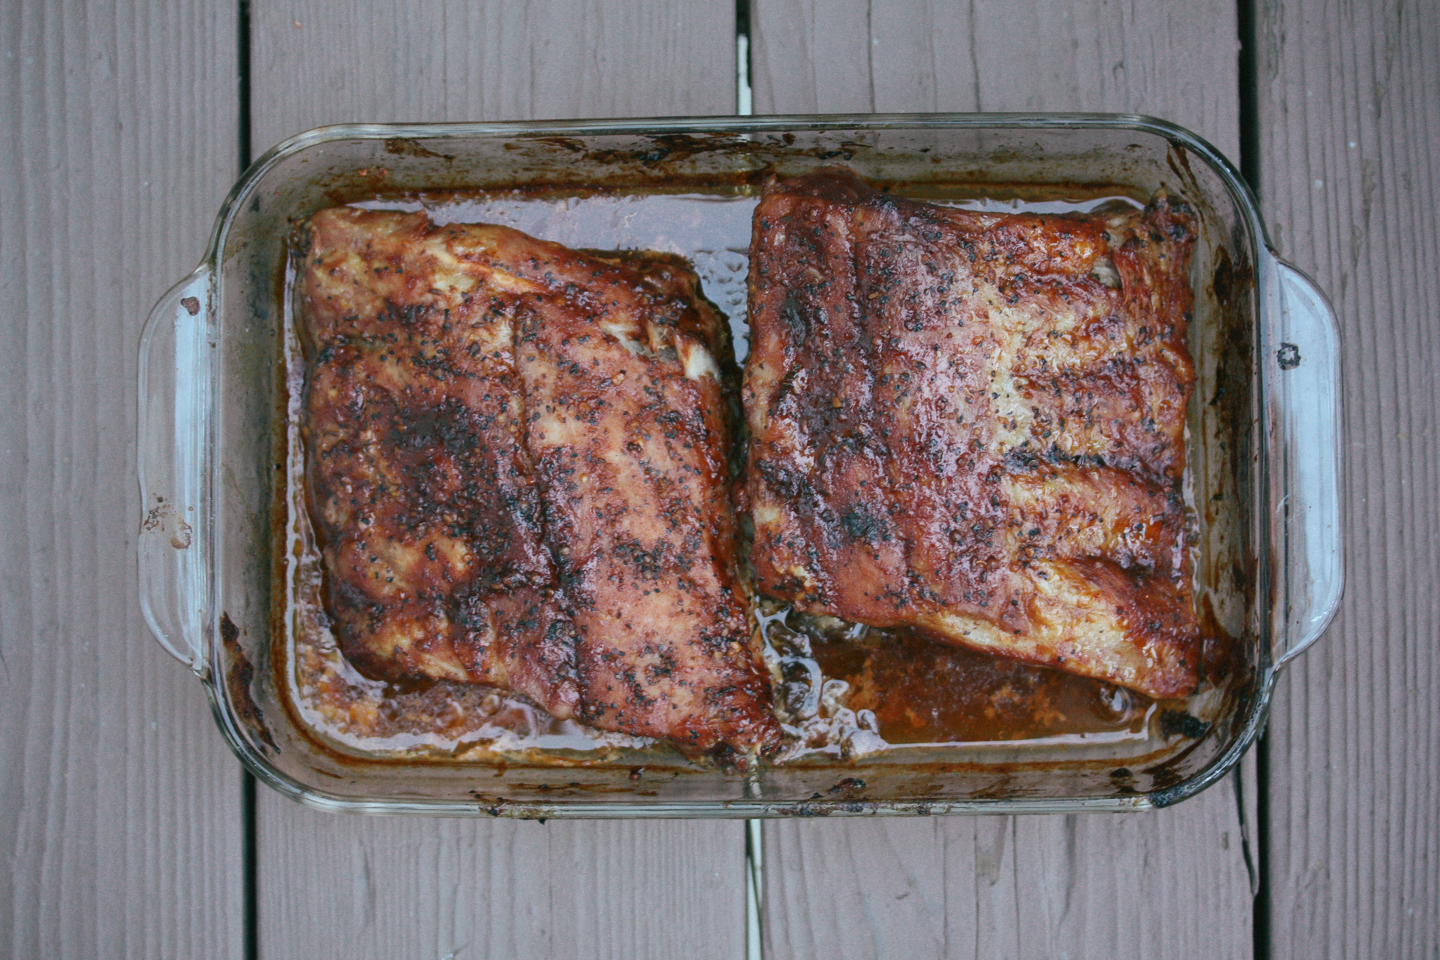 Ribs after the oven